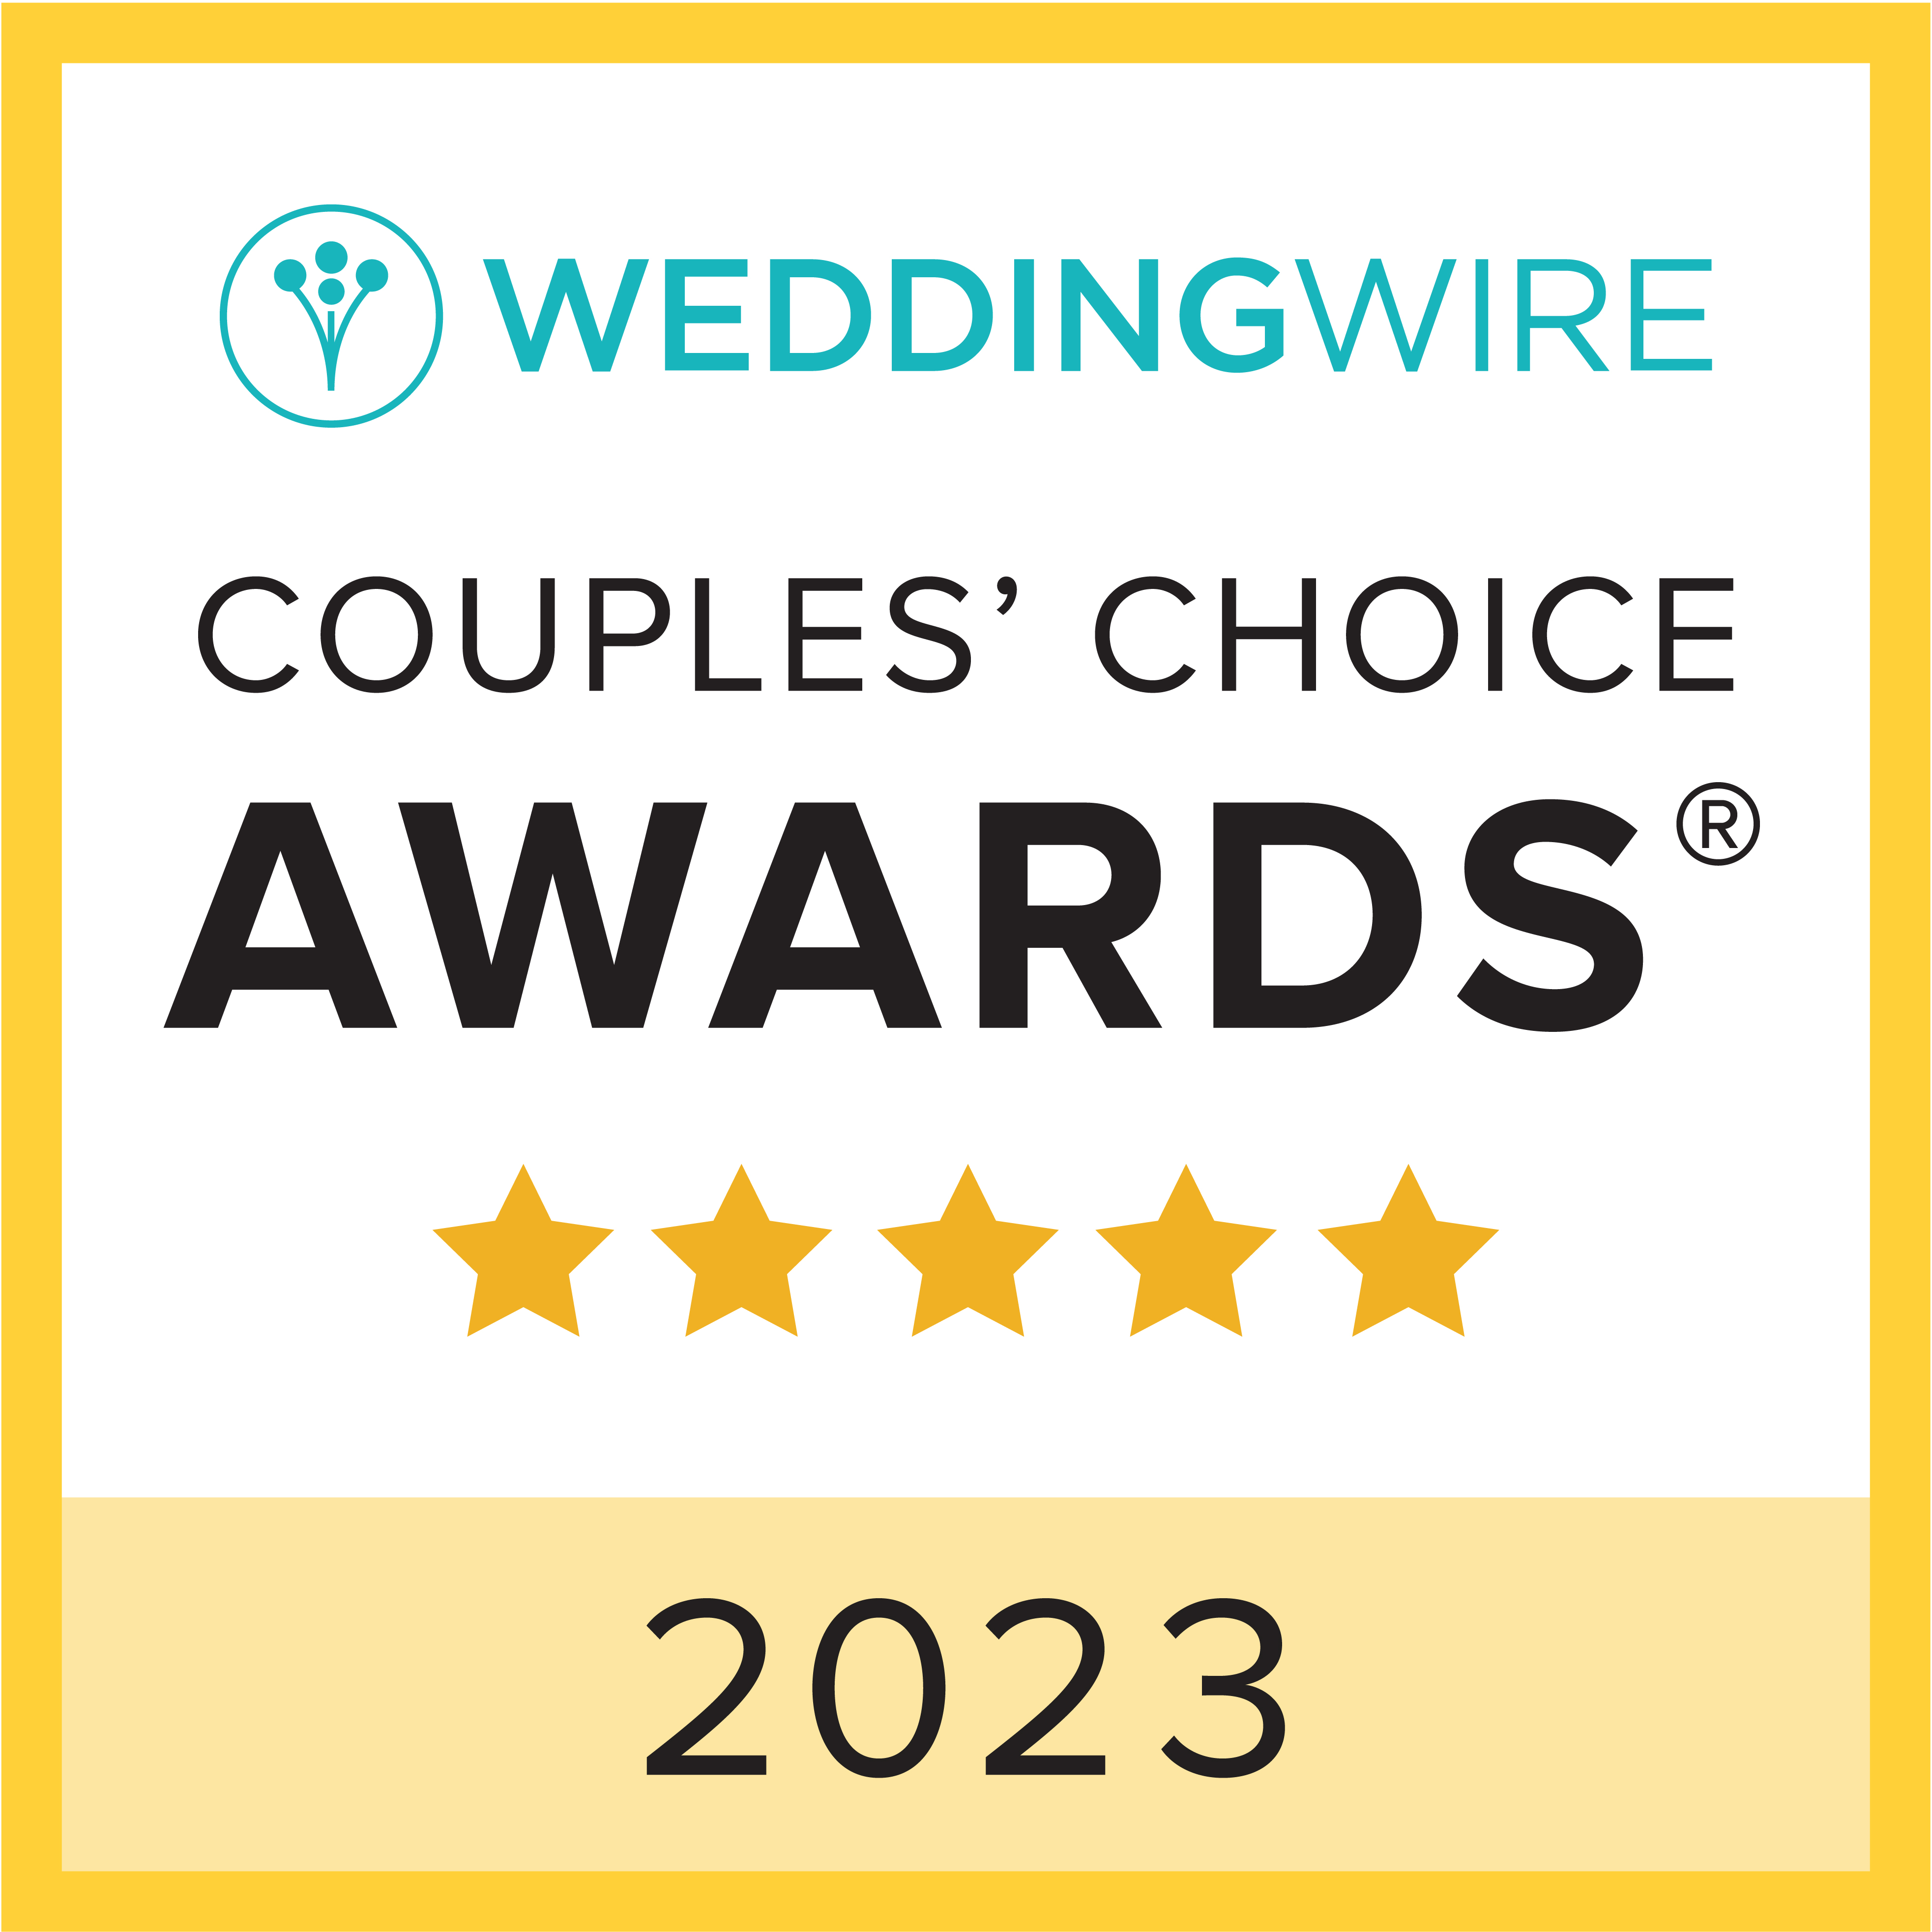 Wedding Wire Couples' Choice Awards 2023